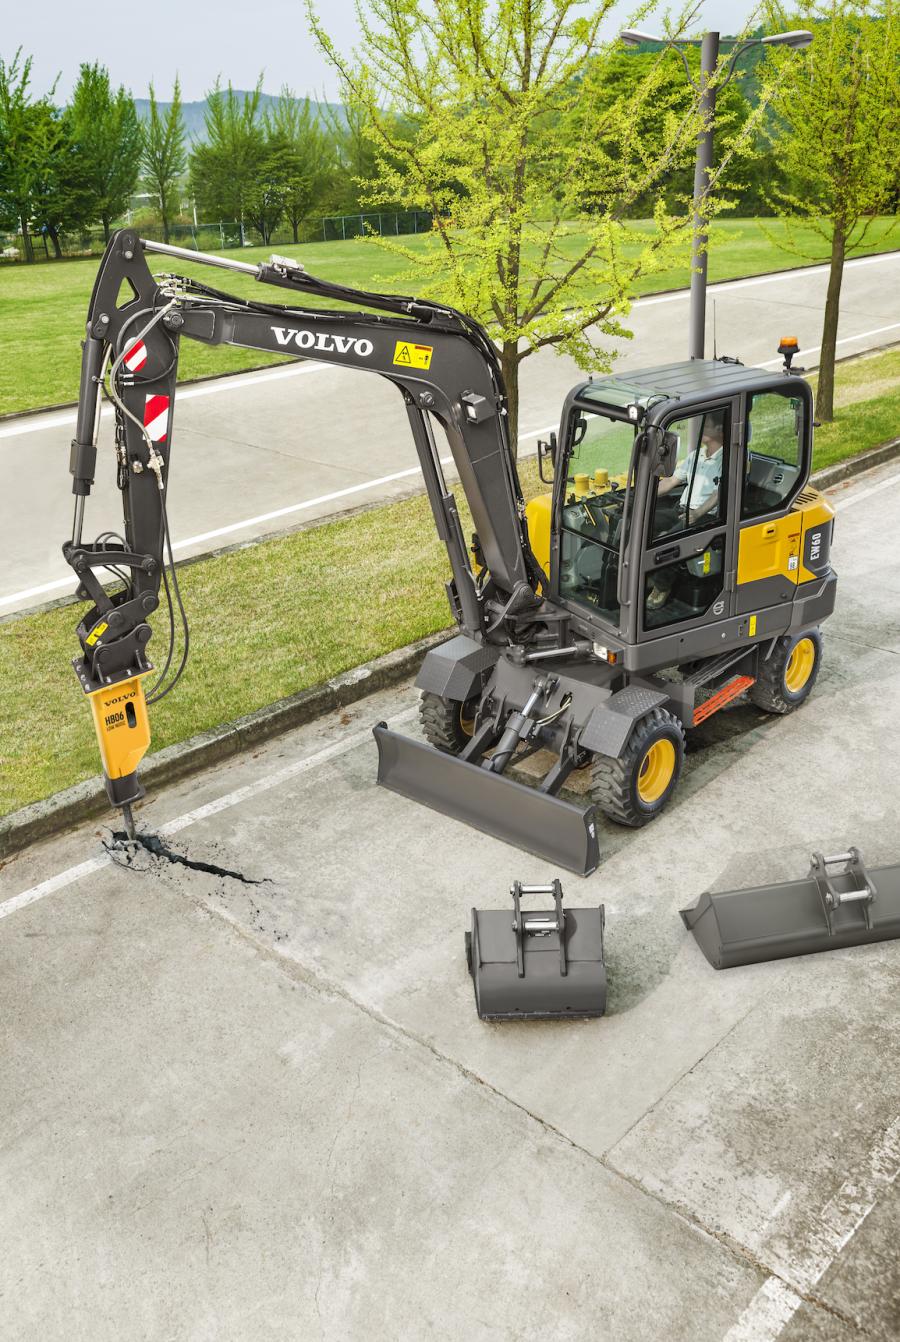 A compact excavator is a great option because of how many different attachments it can support.